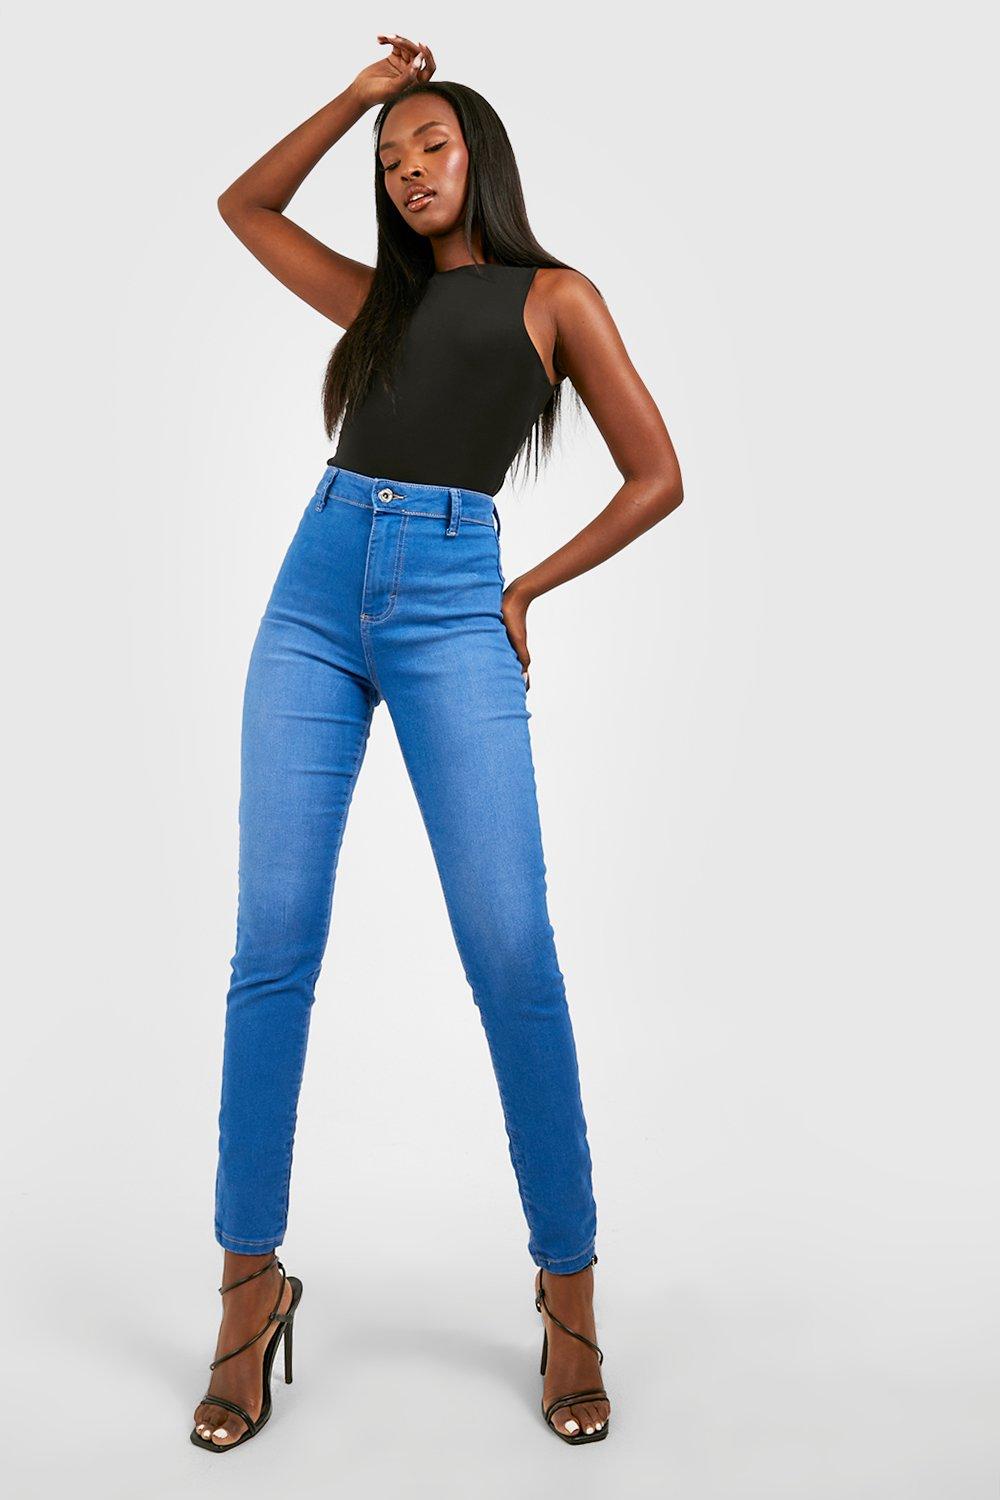 trechter hiërarchie Oven Women's Recycled High Waisted Butt Shaping Jeans | Boohoo UK